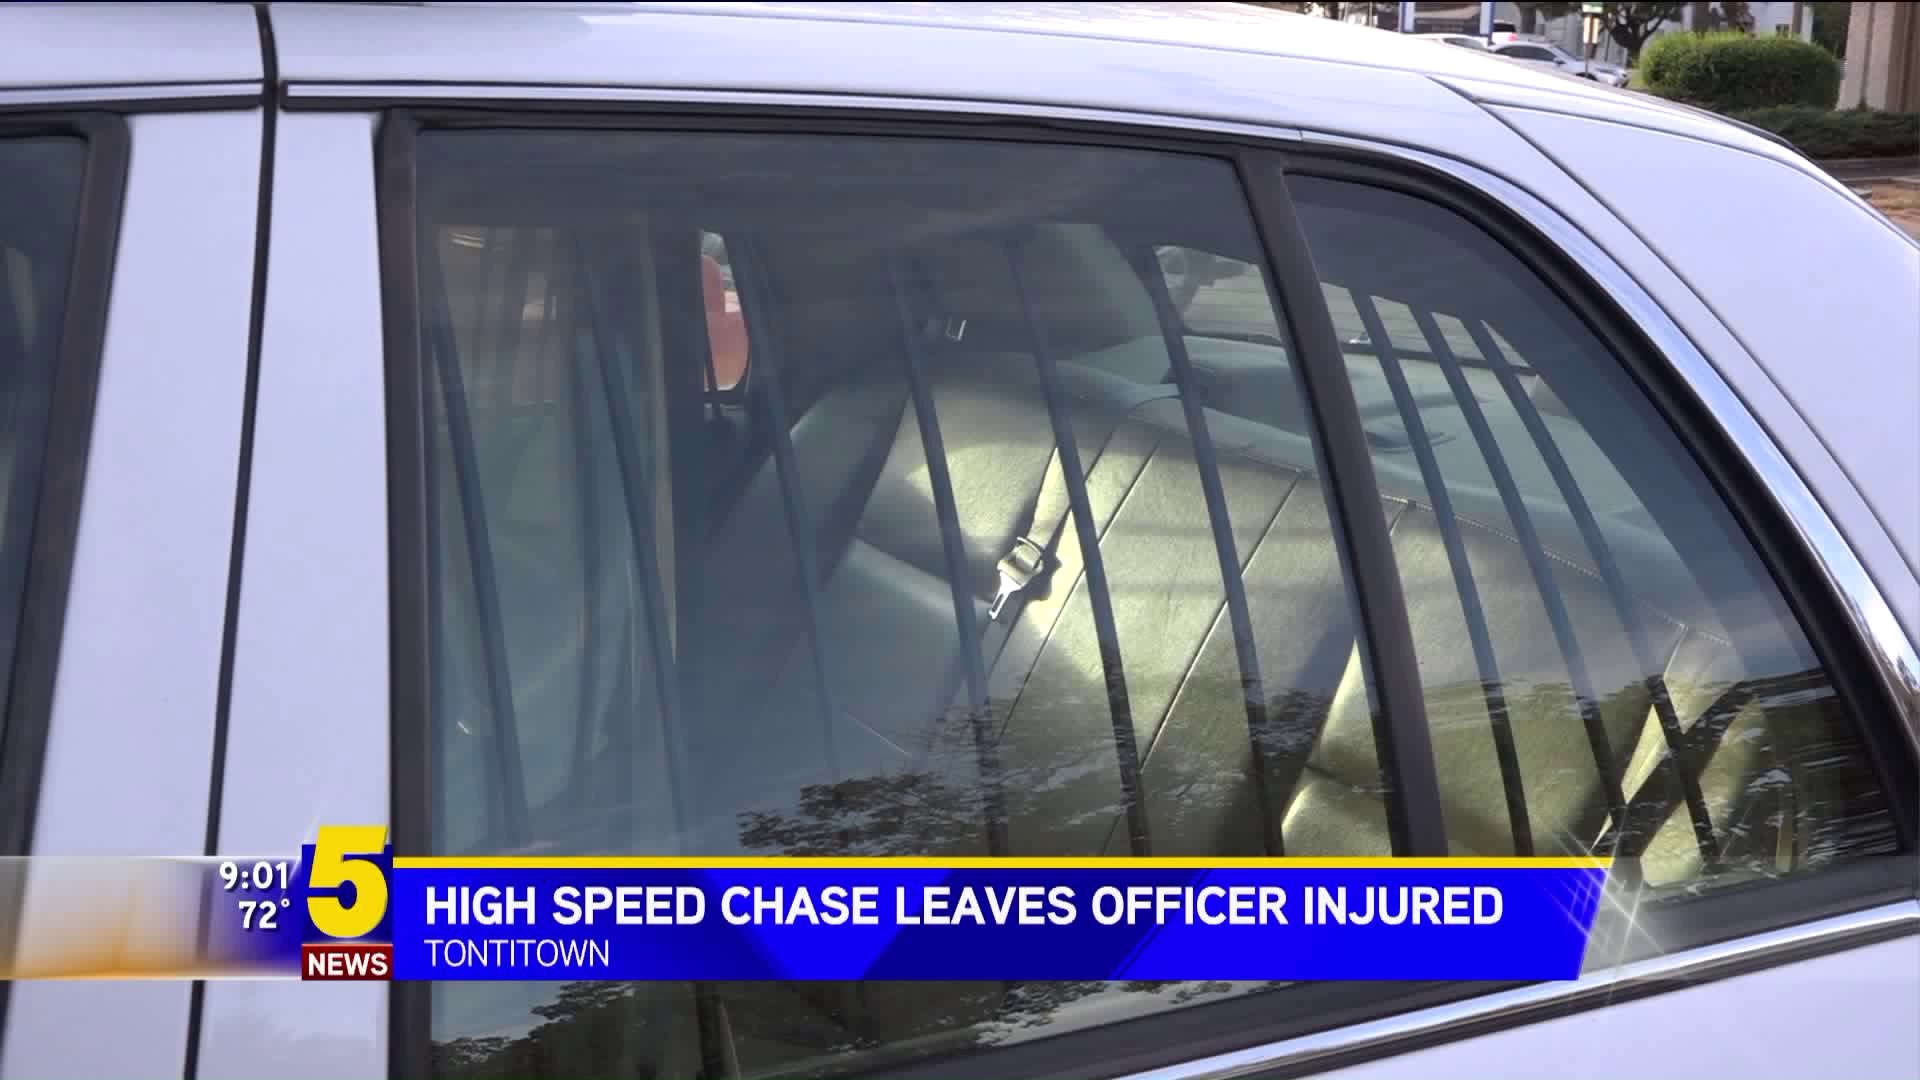 High Speed Chase Leaves Officer Injured